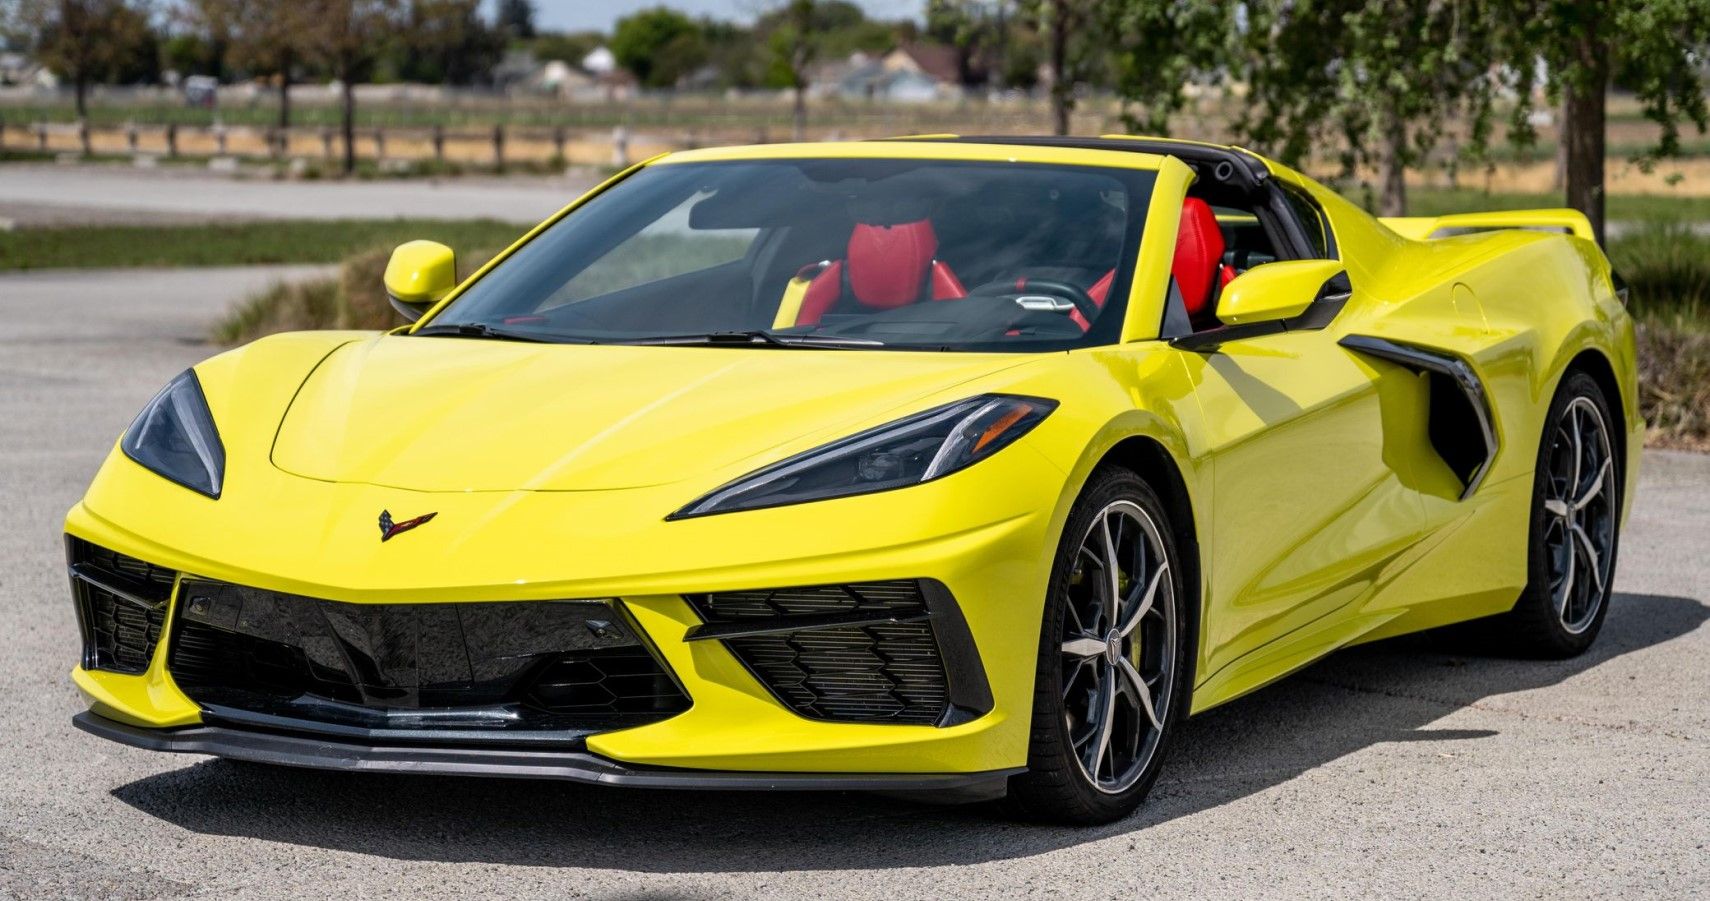 2021 Chevy Corvette Stingray in yellow front third quarter view